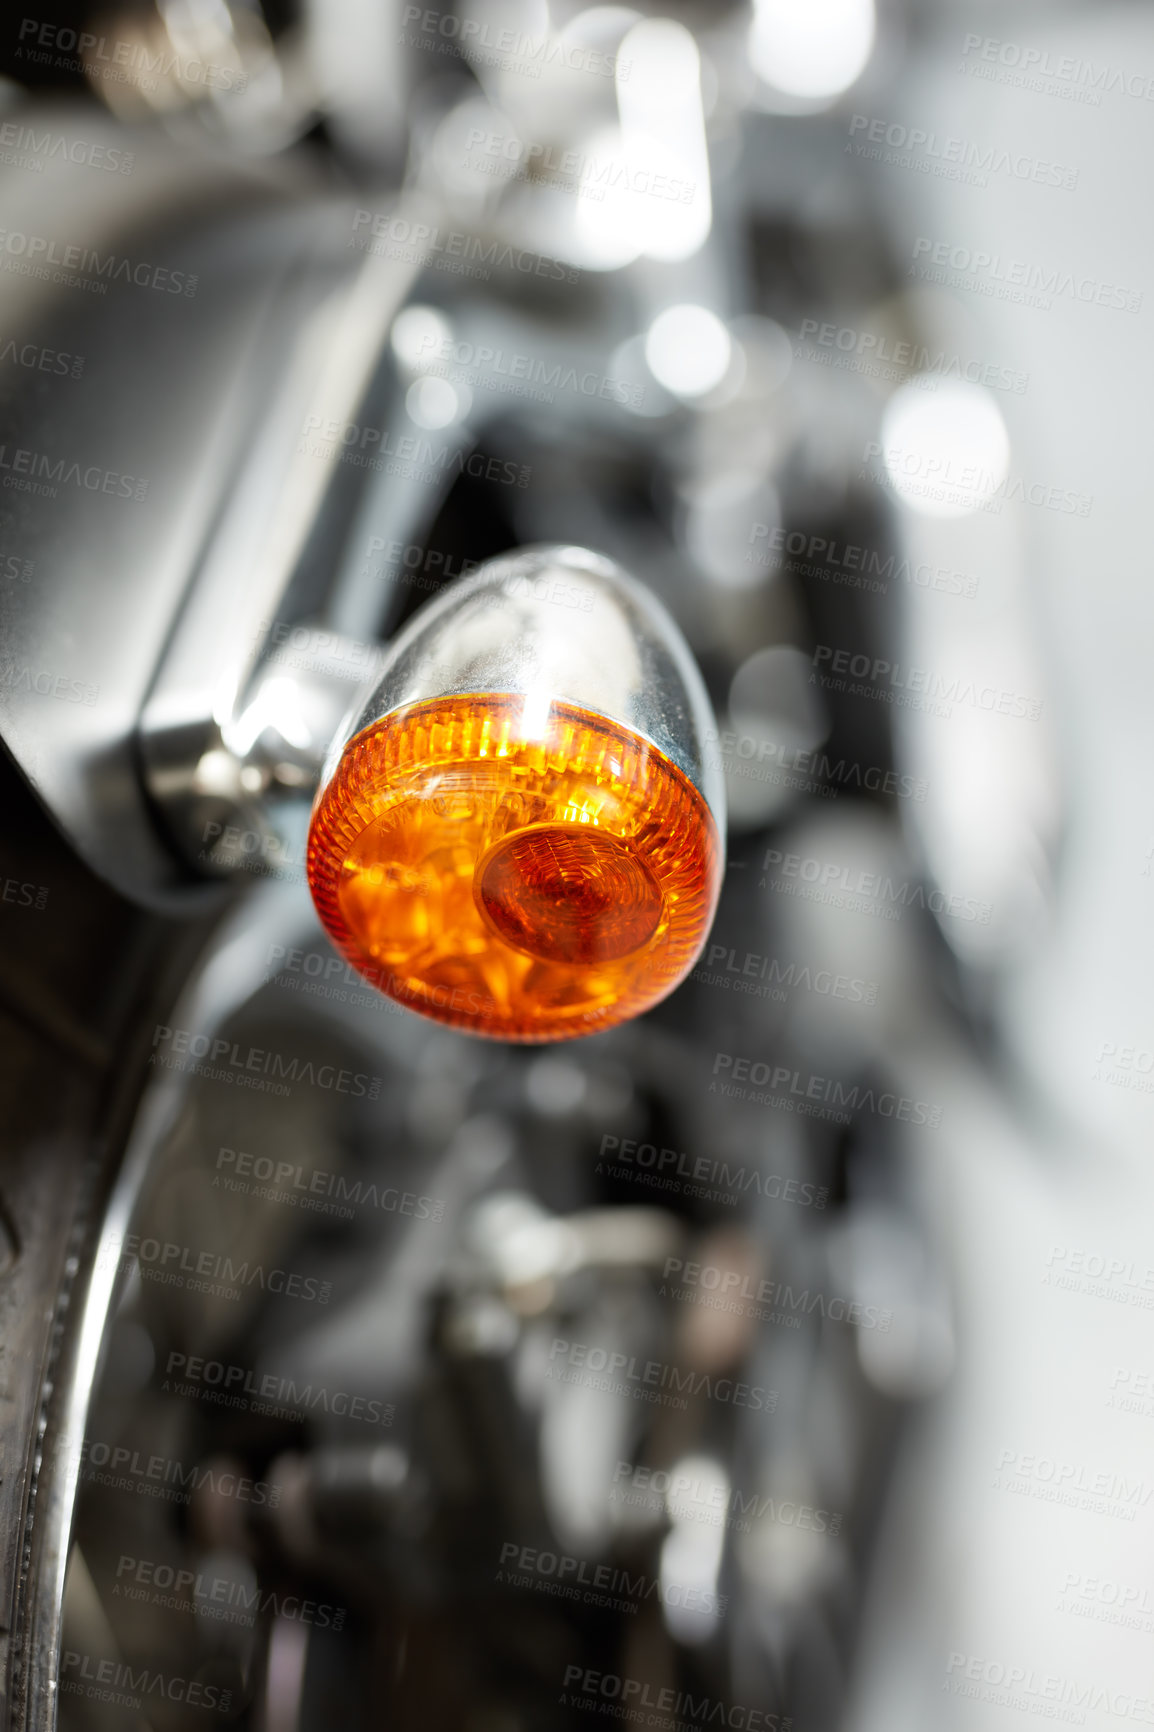 Buy stock photo The side indicator light of a motorbike. Closeup of signal gleam with the rear turning indicator light of a parked motorcycle. Popup of a rear signal glare with a chrome finish and orange LED light